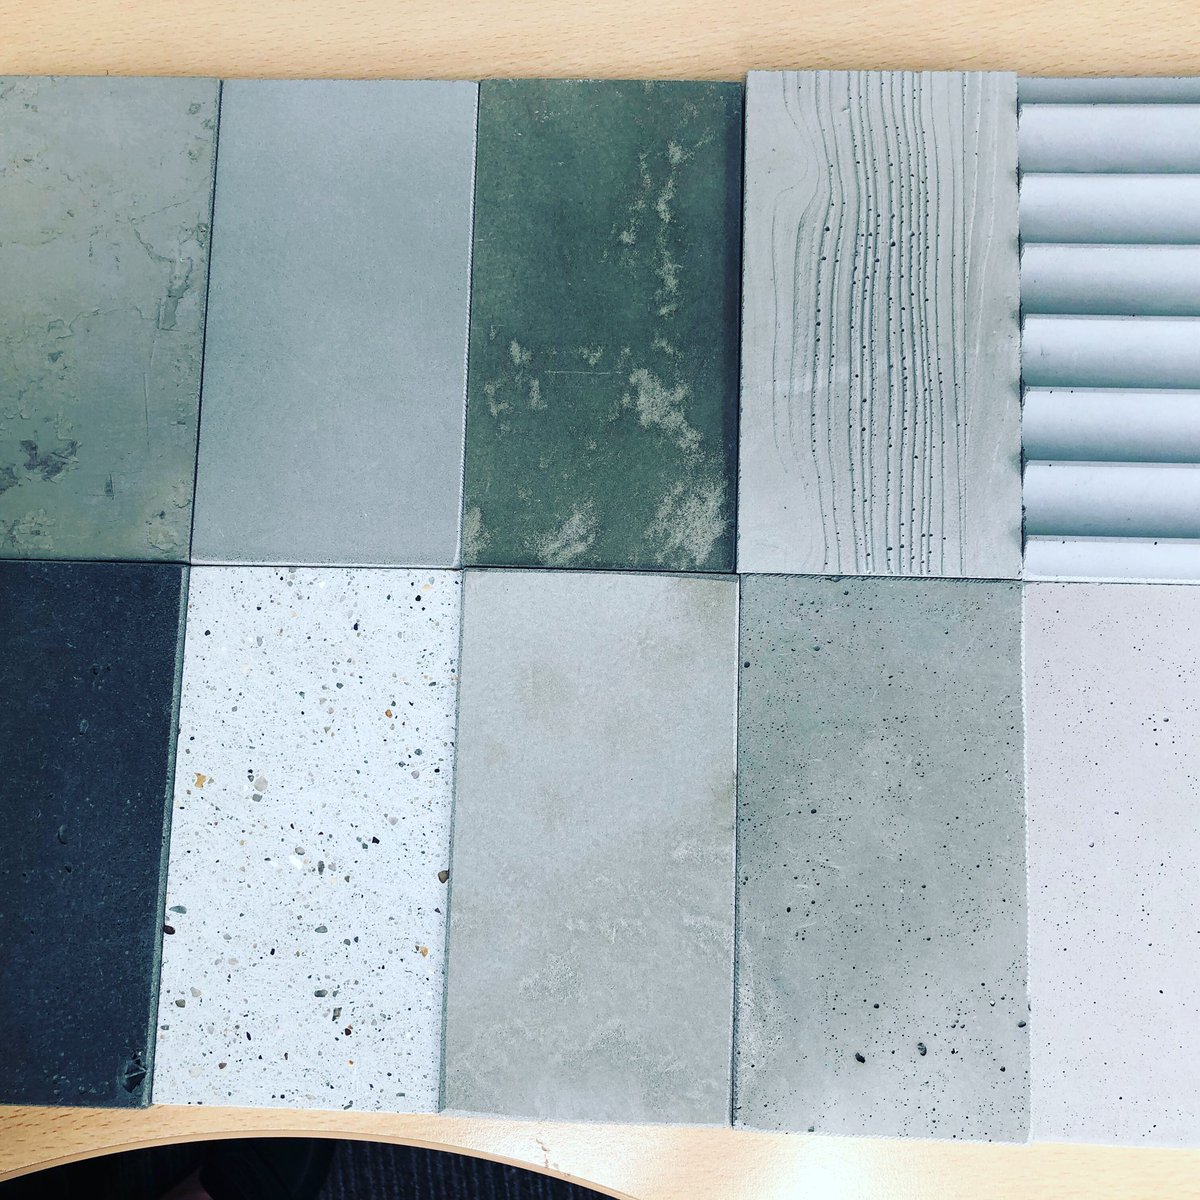 A lovely selection of samples in varying tones and texture going out to one lucky customer. Email sales@mass-concrete.com with your requests